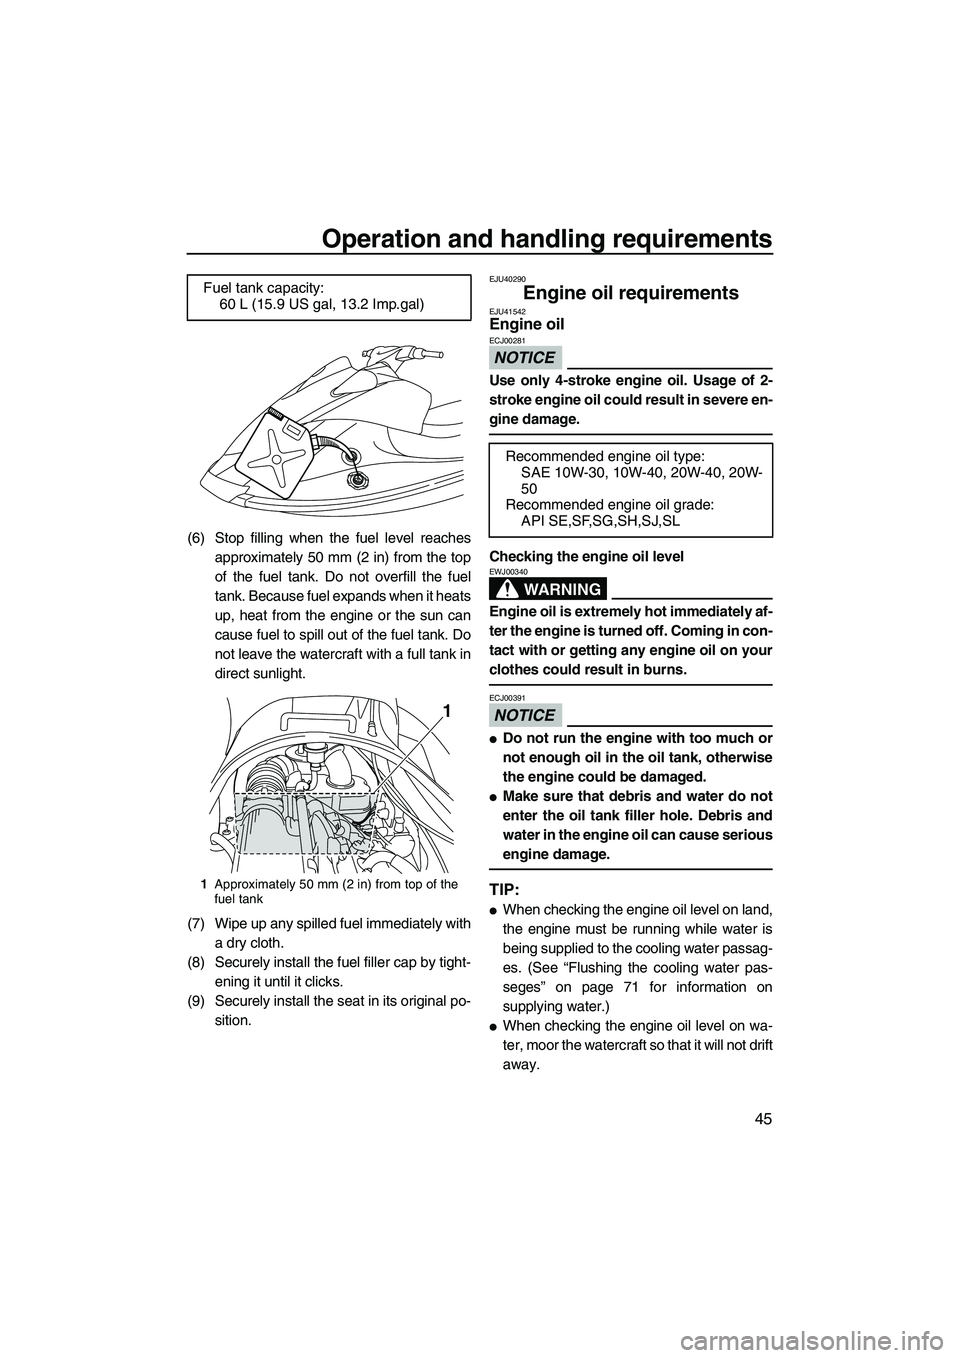 YAMAHA VX CRUISER 2013  Owners Manual Operation and handling requirements
45
(6) Stop filling when the fuel level reachesapproximately 50 mm (2 in) from the top
of the fuel tank. Do not overfill the fuel
tank. Because fuel expands when it